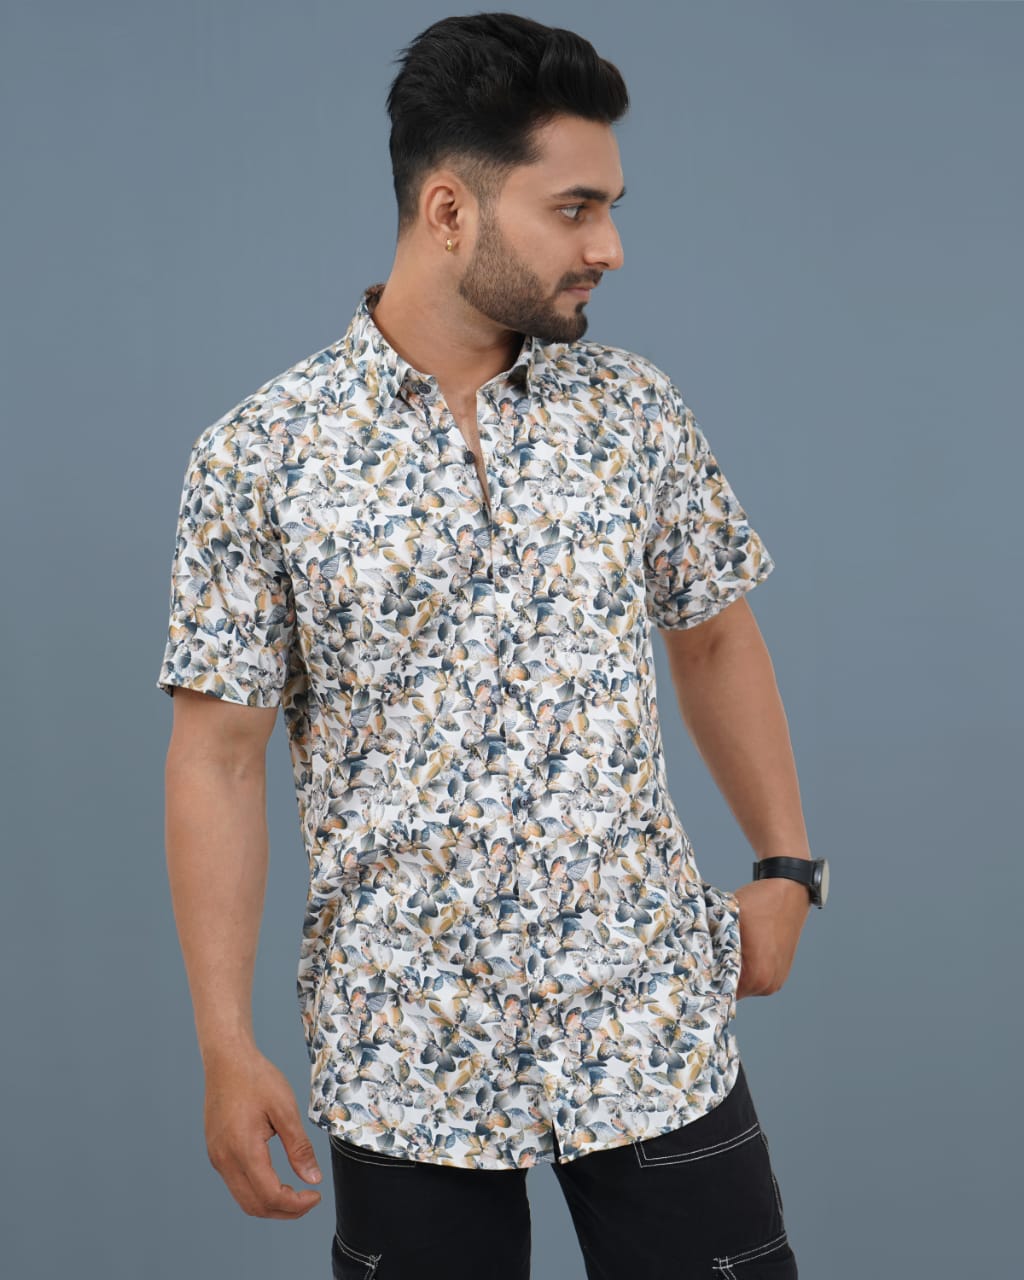 Men Green and yellow Floral Slim Fit Digital Print Casual Half sleeves Shirt 100% cotton